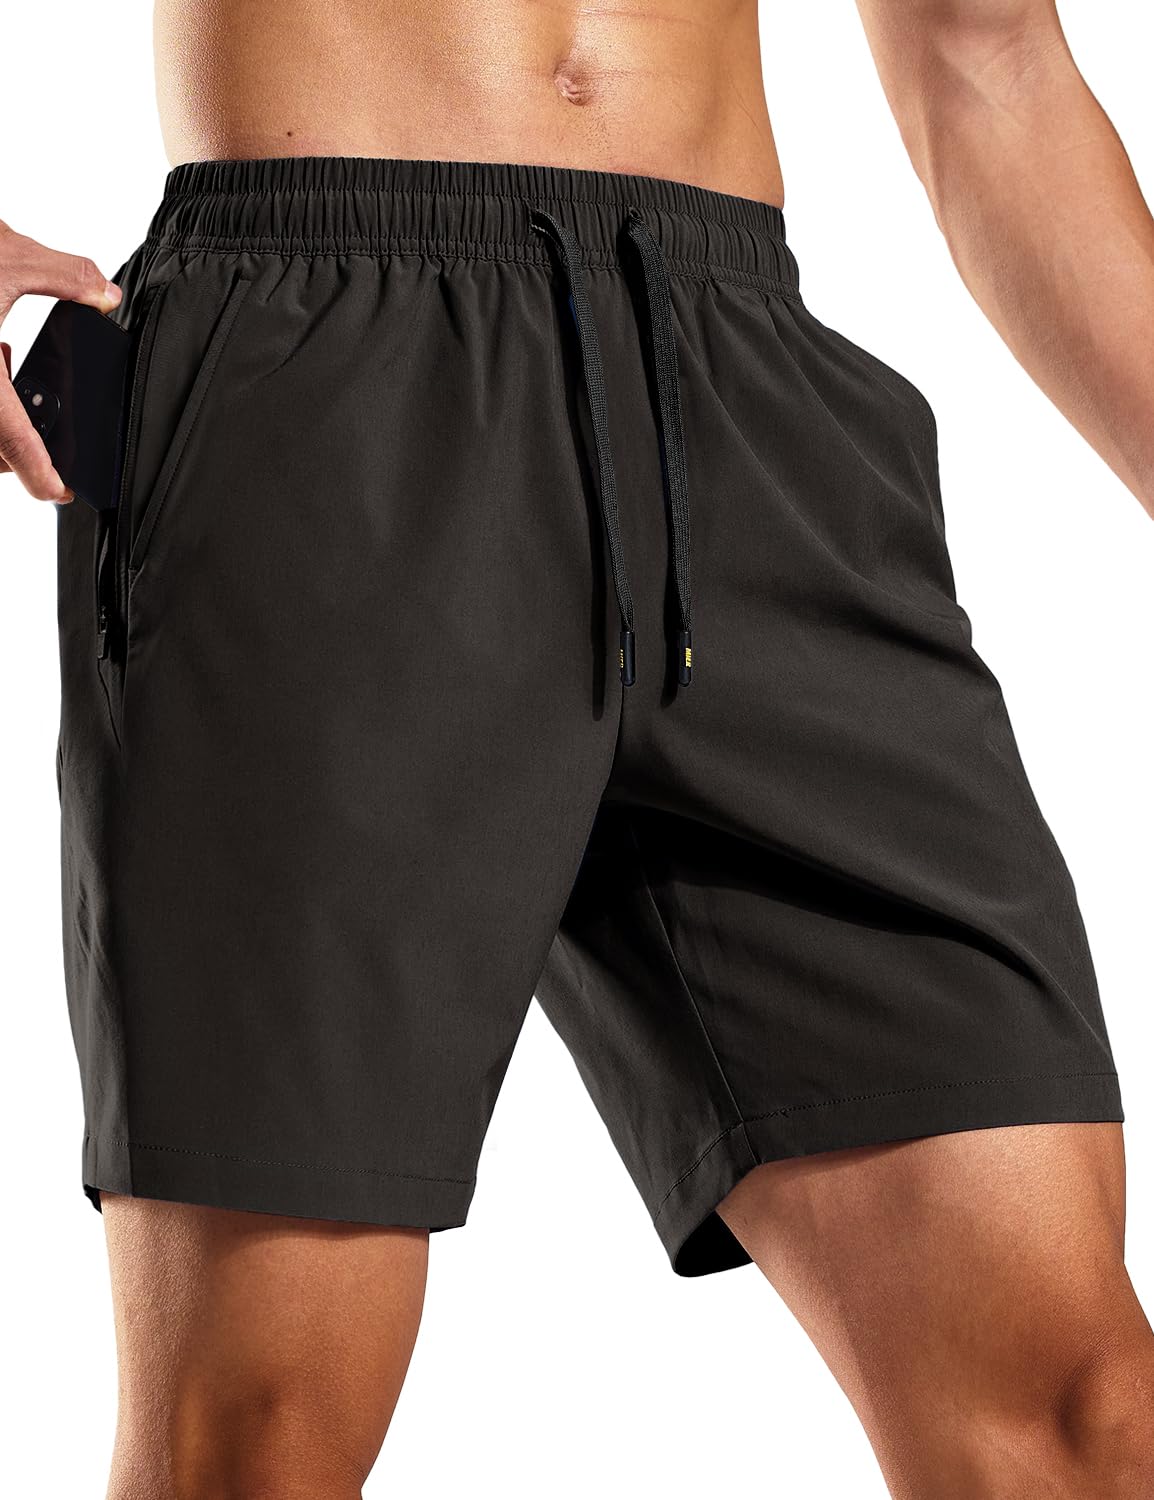 Mier Men's 7 inch Quick-Dry Running Shorts with Zipper Pockets, Black / XL